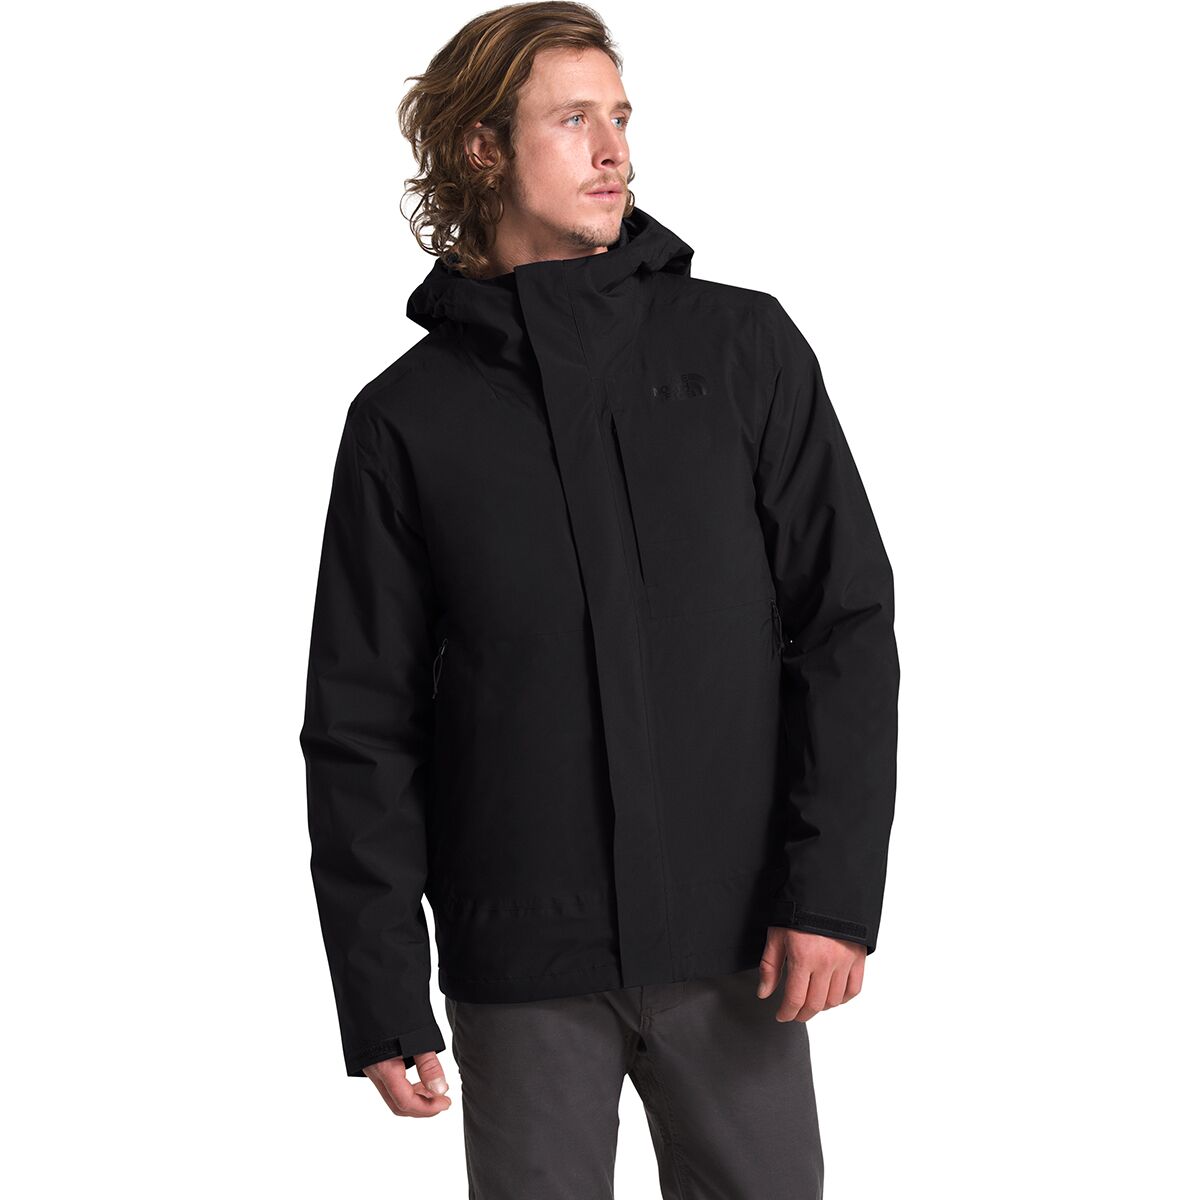 the north face carto triclimate jacket men's on sale